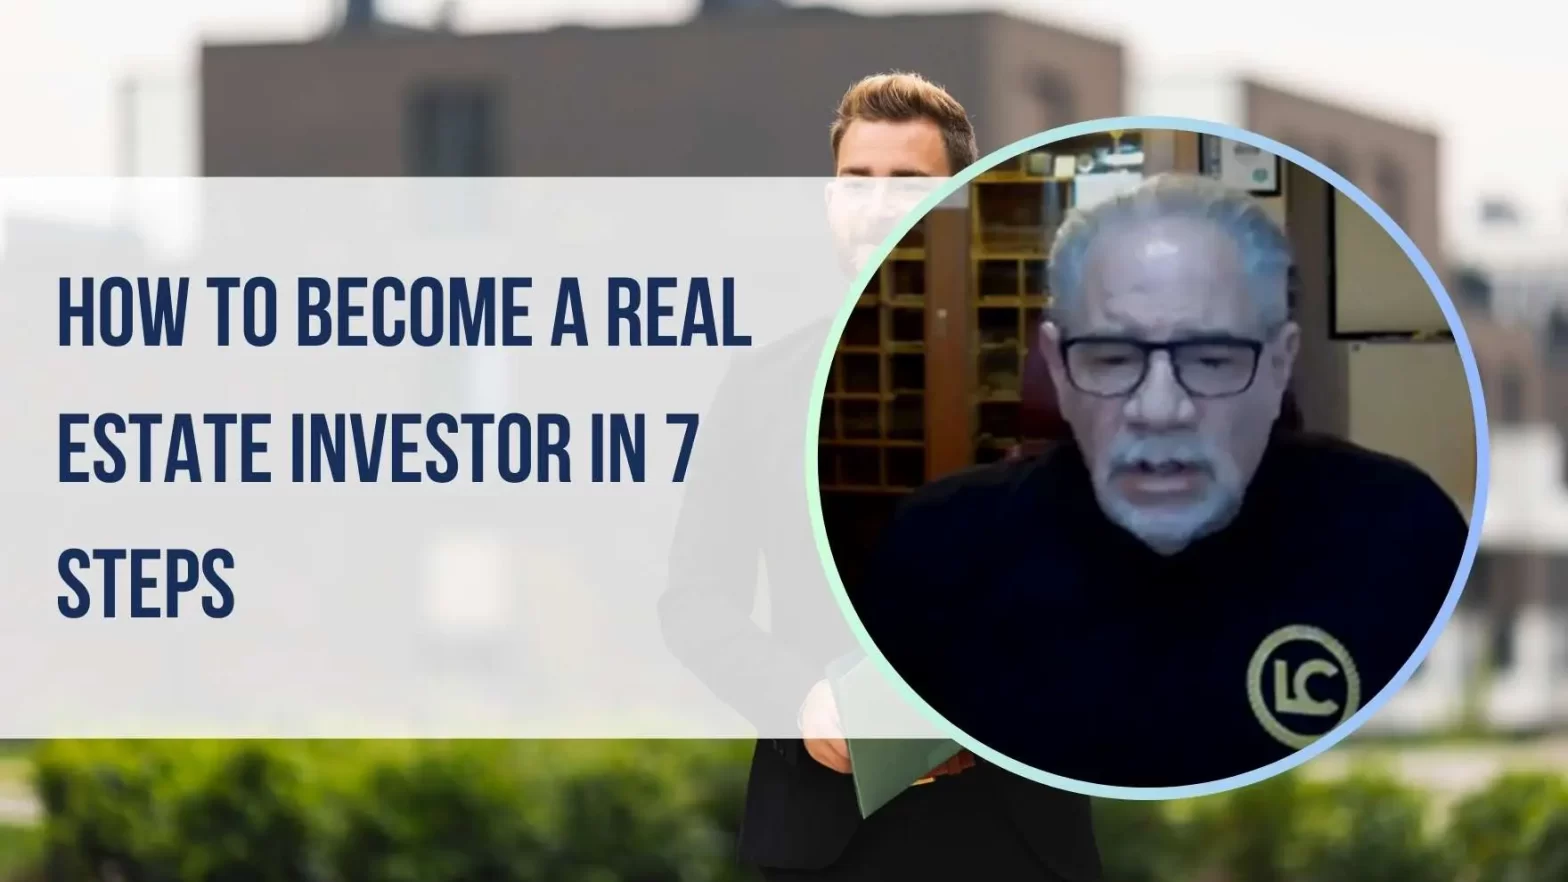 How To Become A Real Estate Investor In 7 Steps